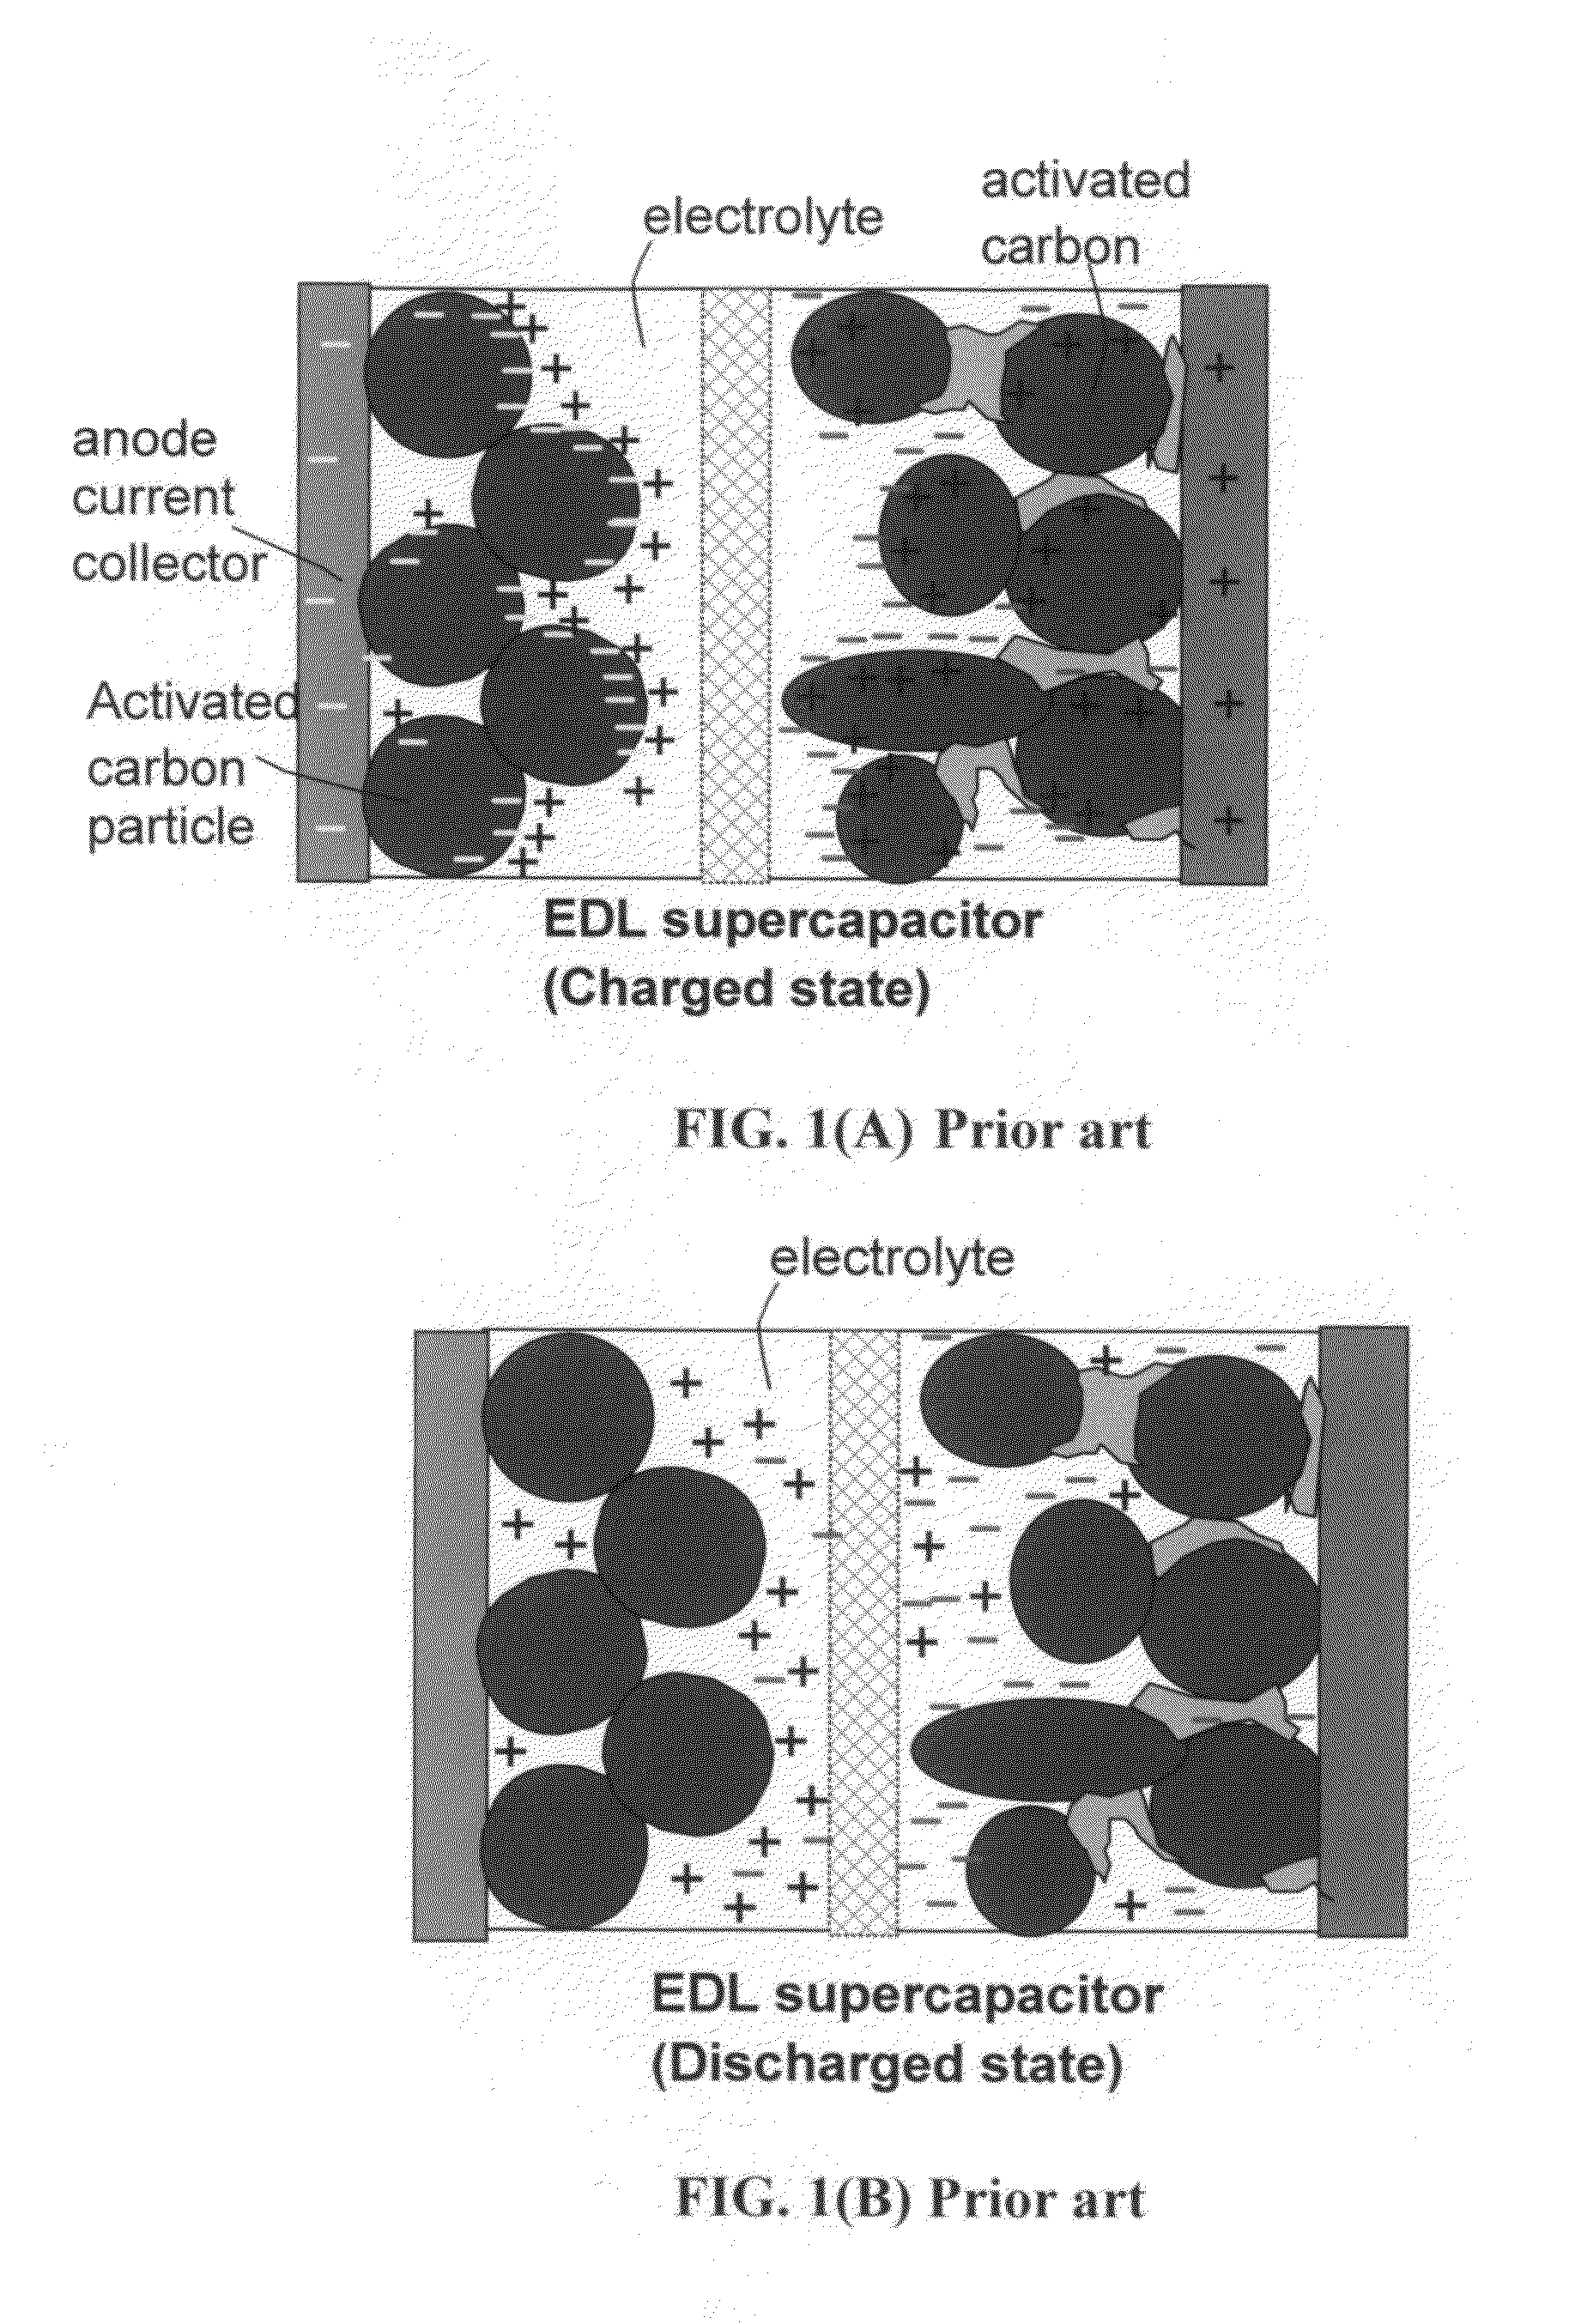 Surface-mediated cell-powered vehicles and methods of operating same